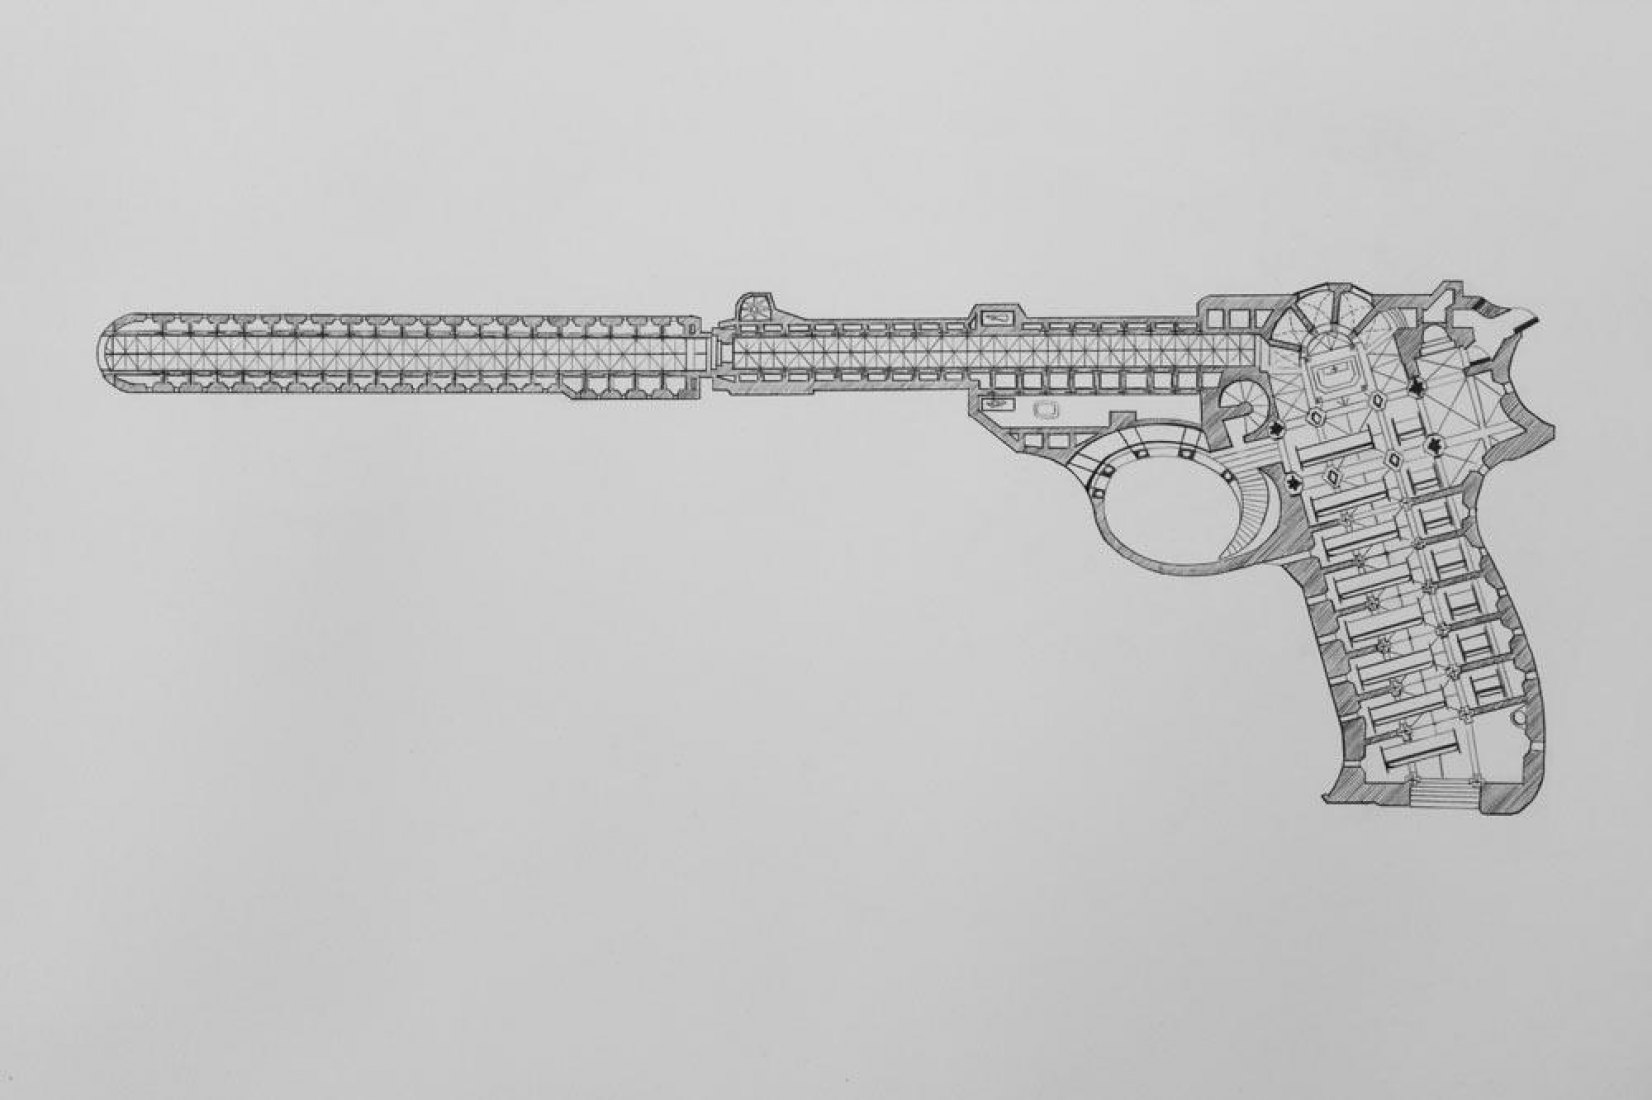 X -Walther P38 silencieux-: 30x56cm. 2011.